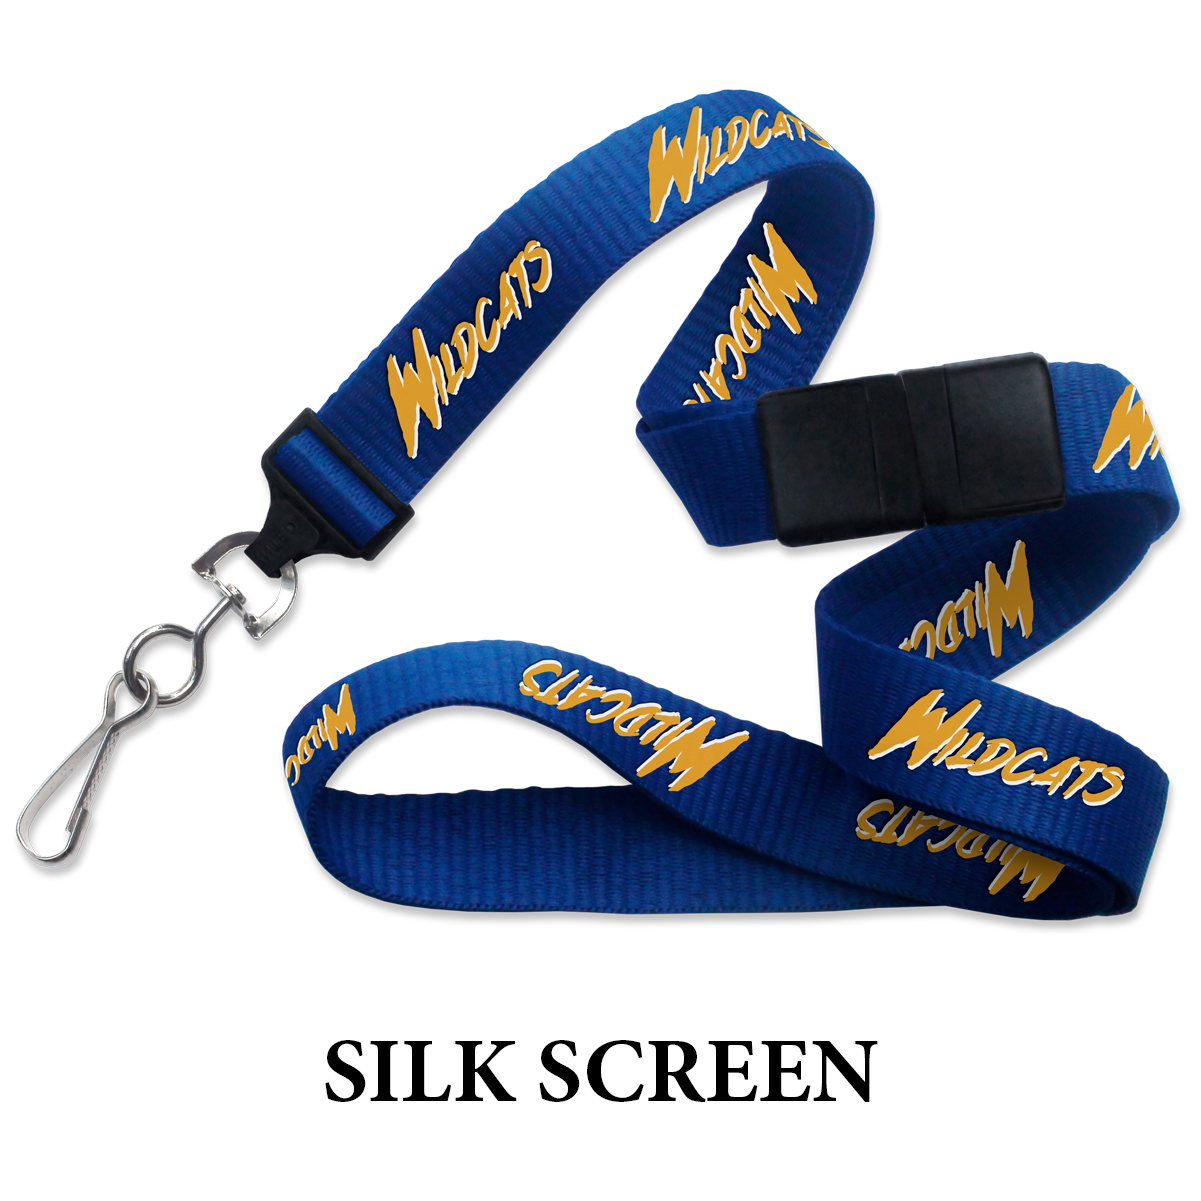 Custom Printed Lanyards Online Designer - Personalized Lanyards for Company, Conference, and VIP Events with "Wildcats" printed in yellow repeatedly along the strap, featuring a metal clip hook and a black plastic buckle. Text below reads "SILK SCREEN PRINTING." Quantity discounts available for bulk lanyards.